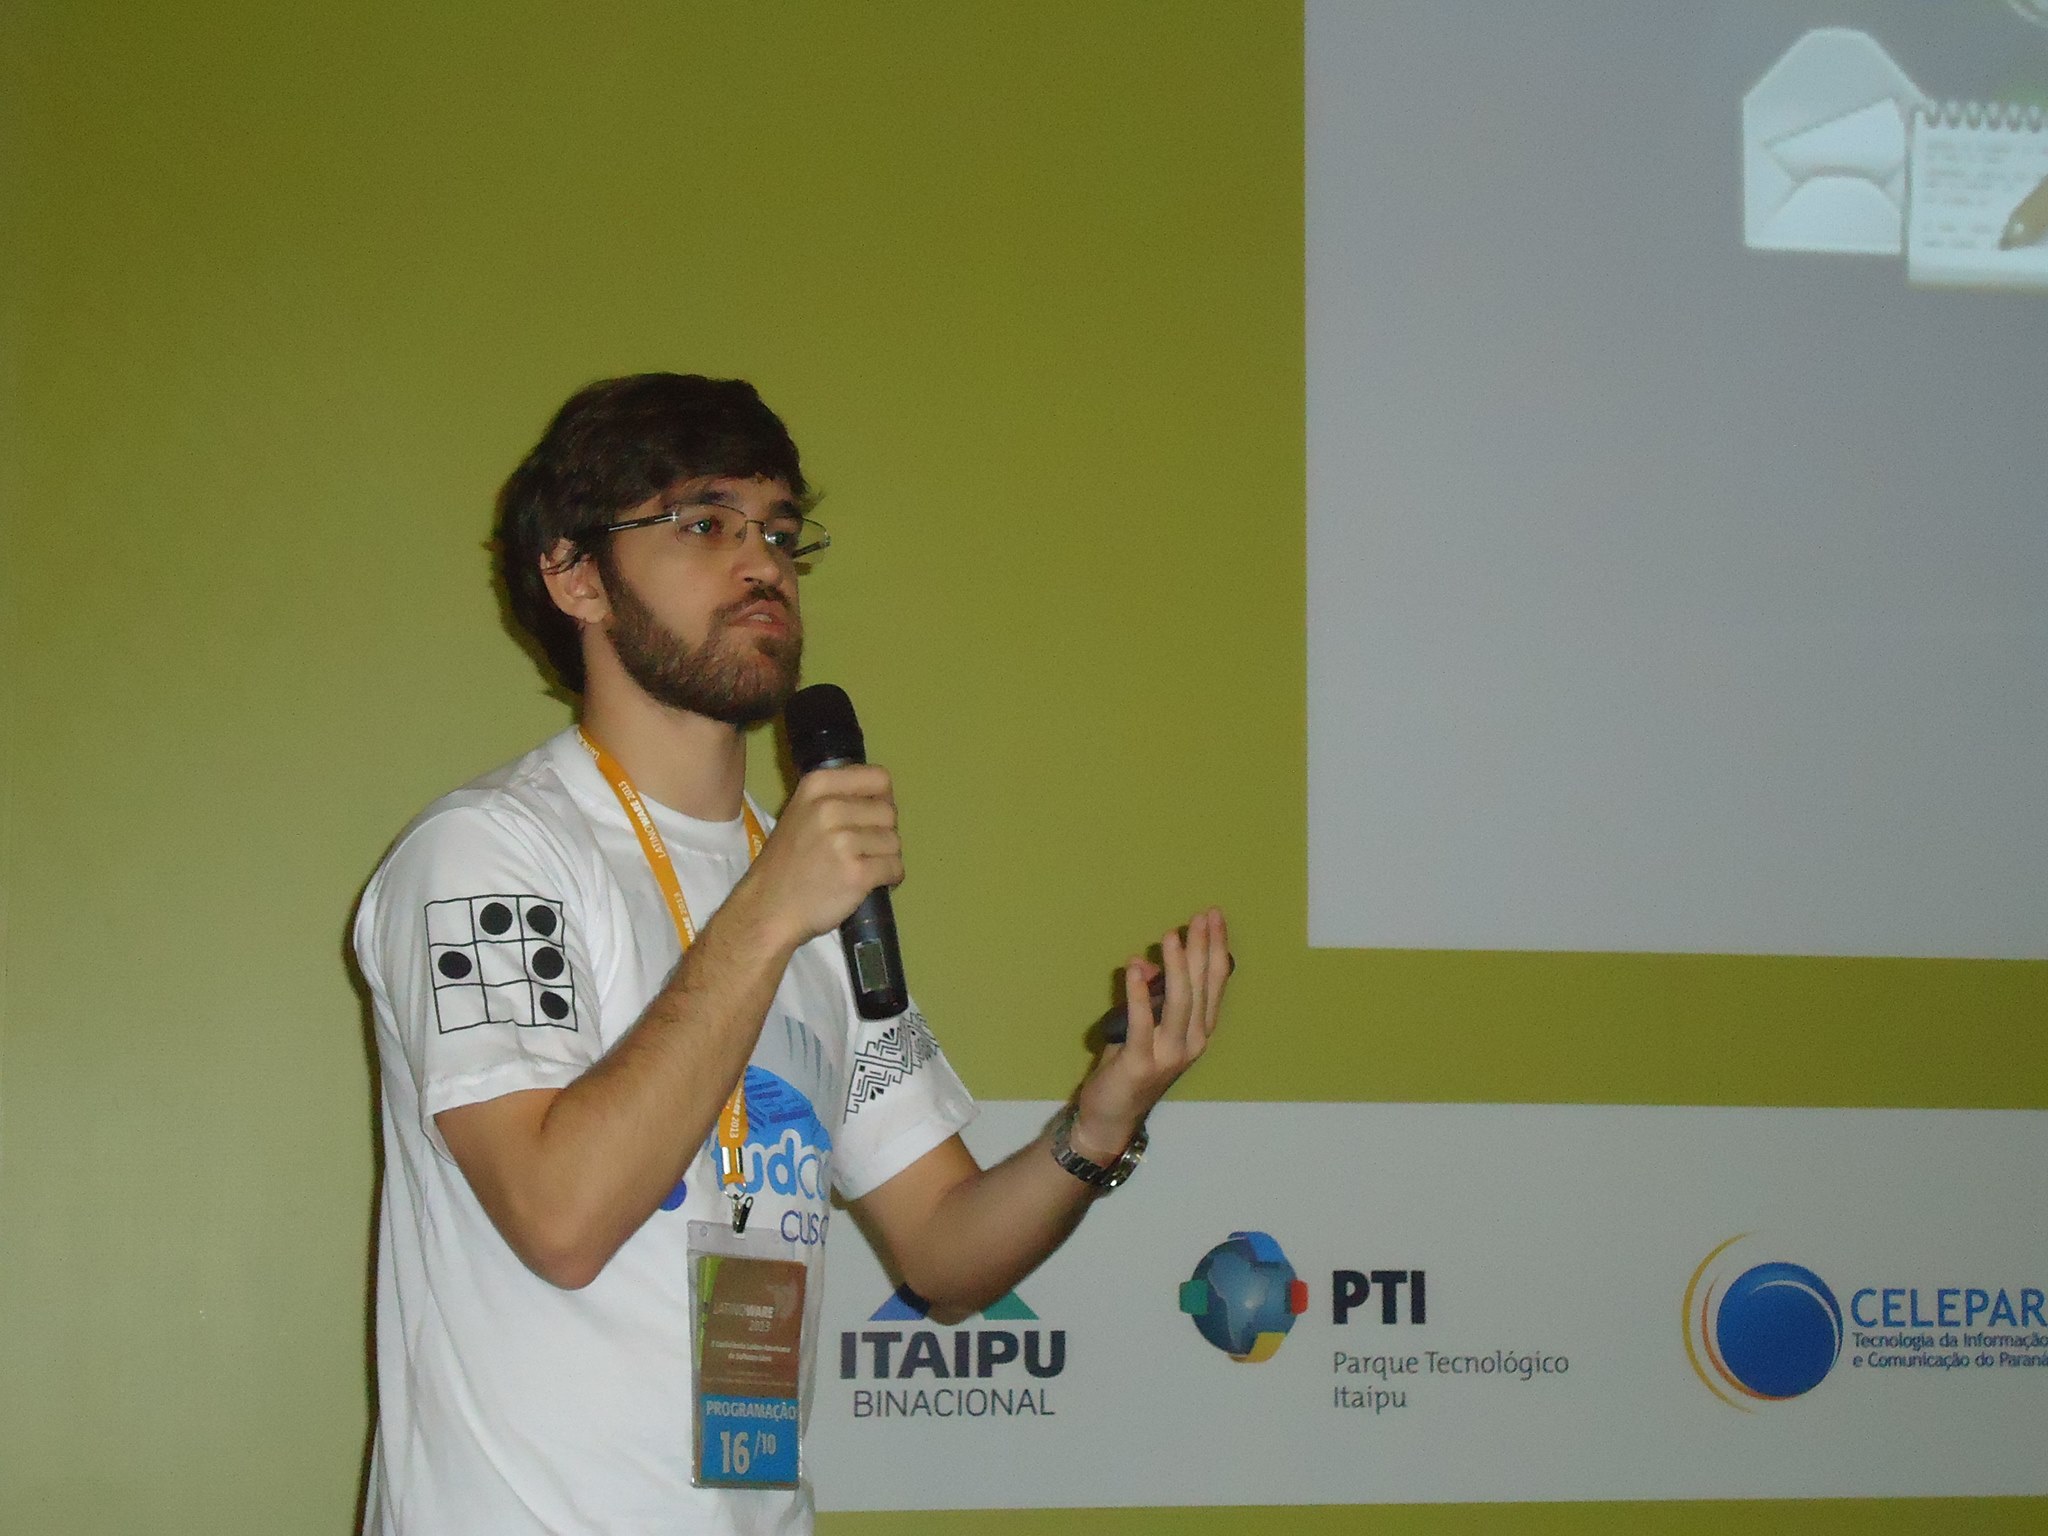 Giving a speech at Latinoware (2014).